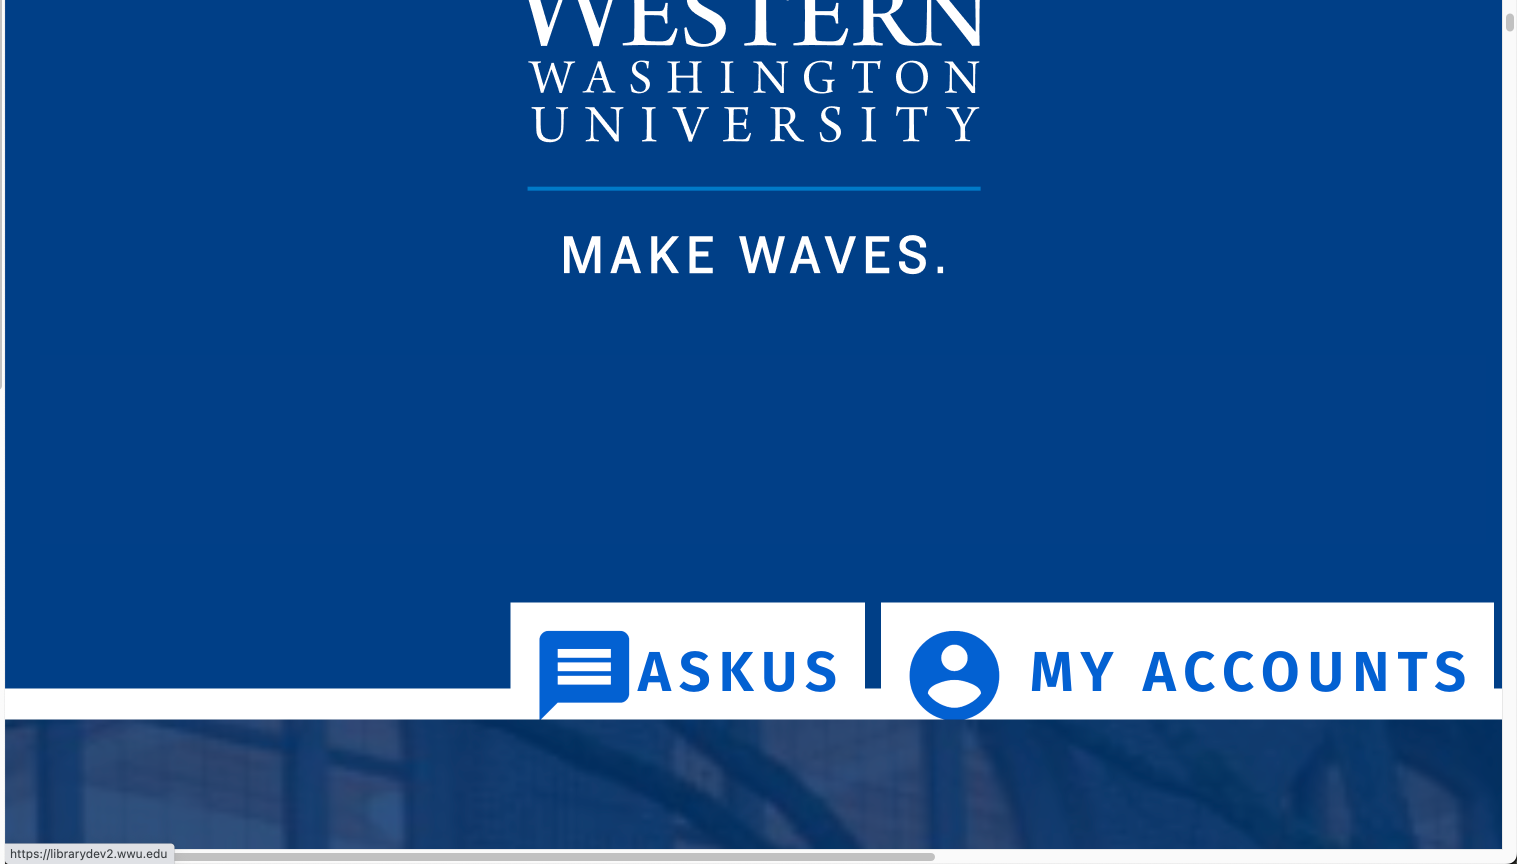 Two links appear underneath the Western logo and above main content